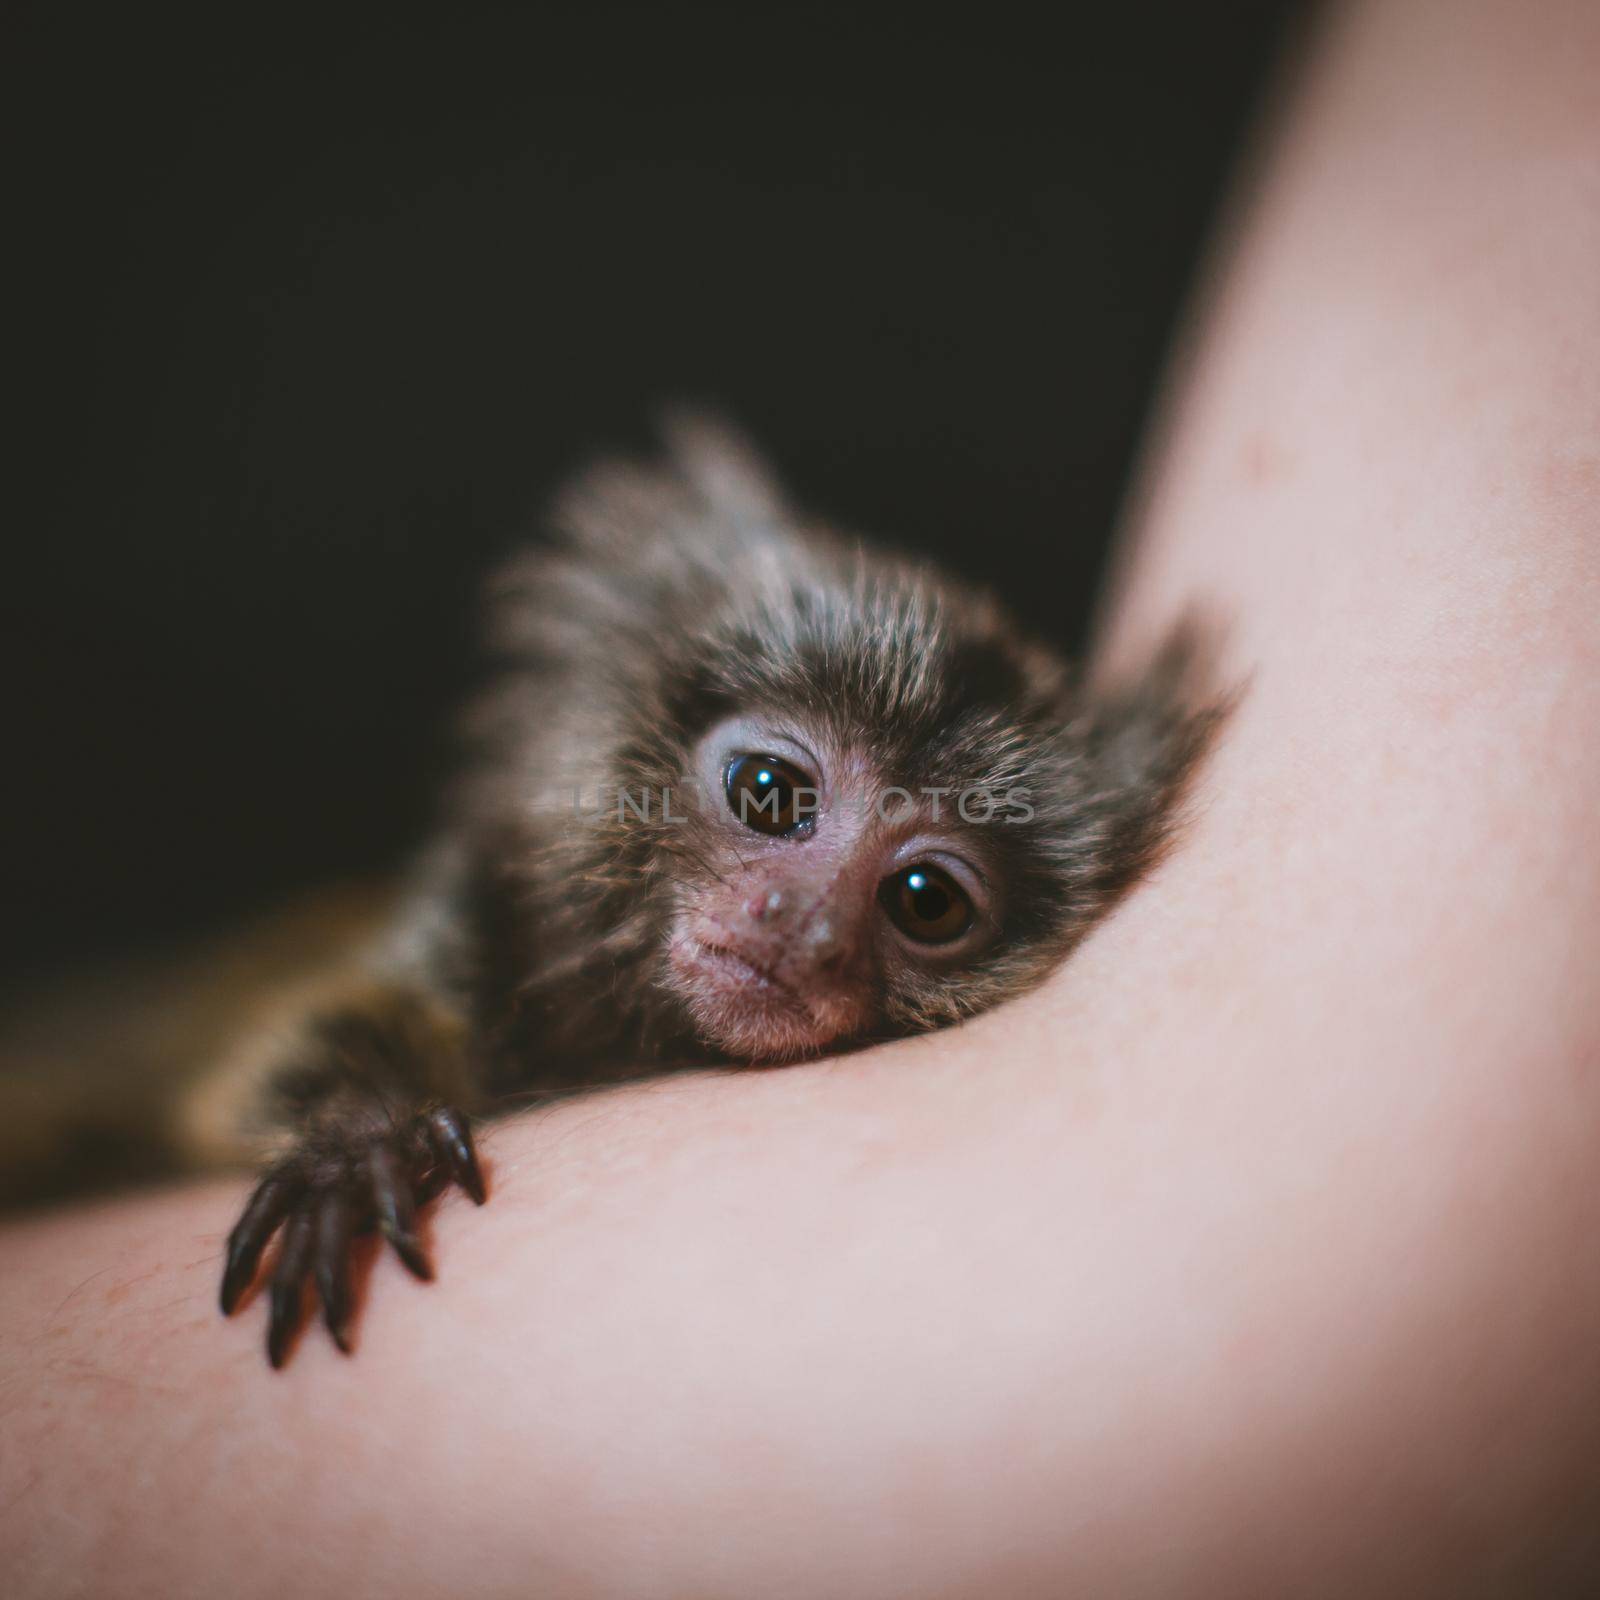 The common marmoset's babies on hand, isolated on black by RosaJay